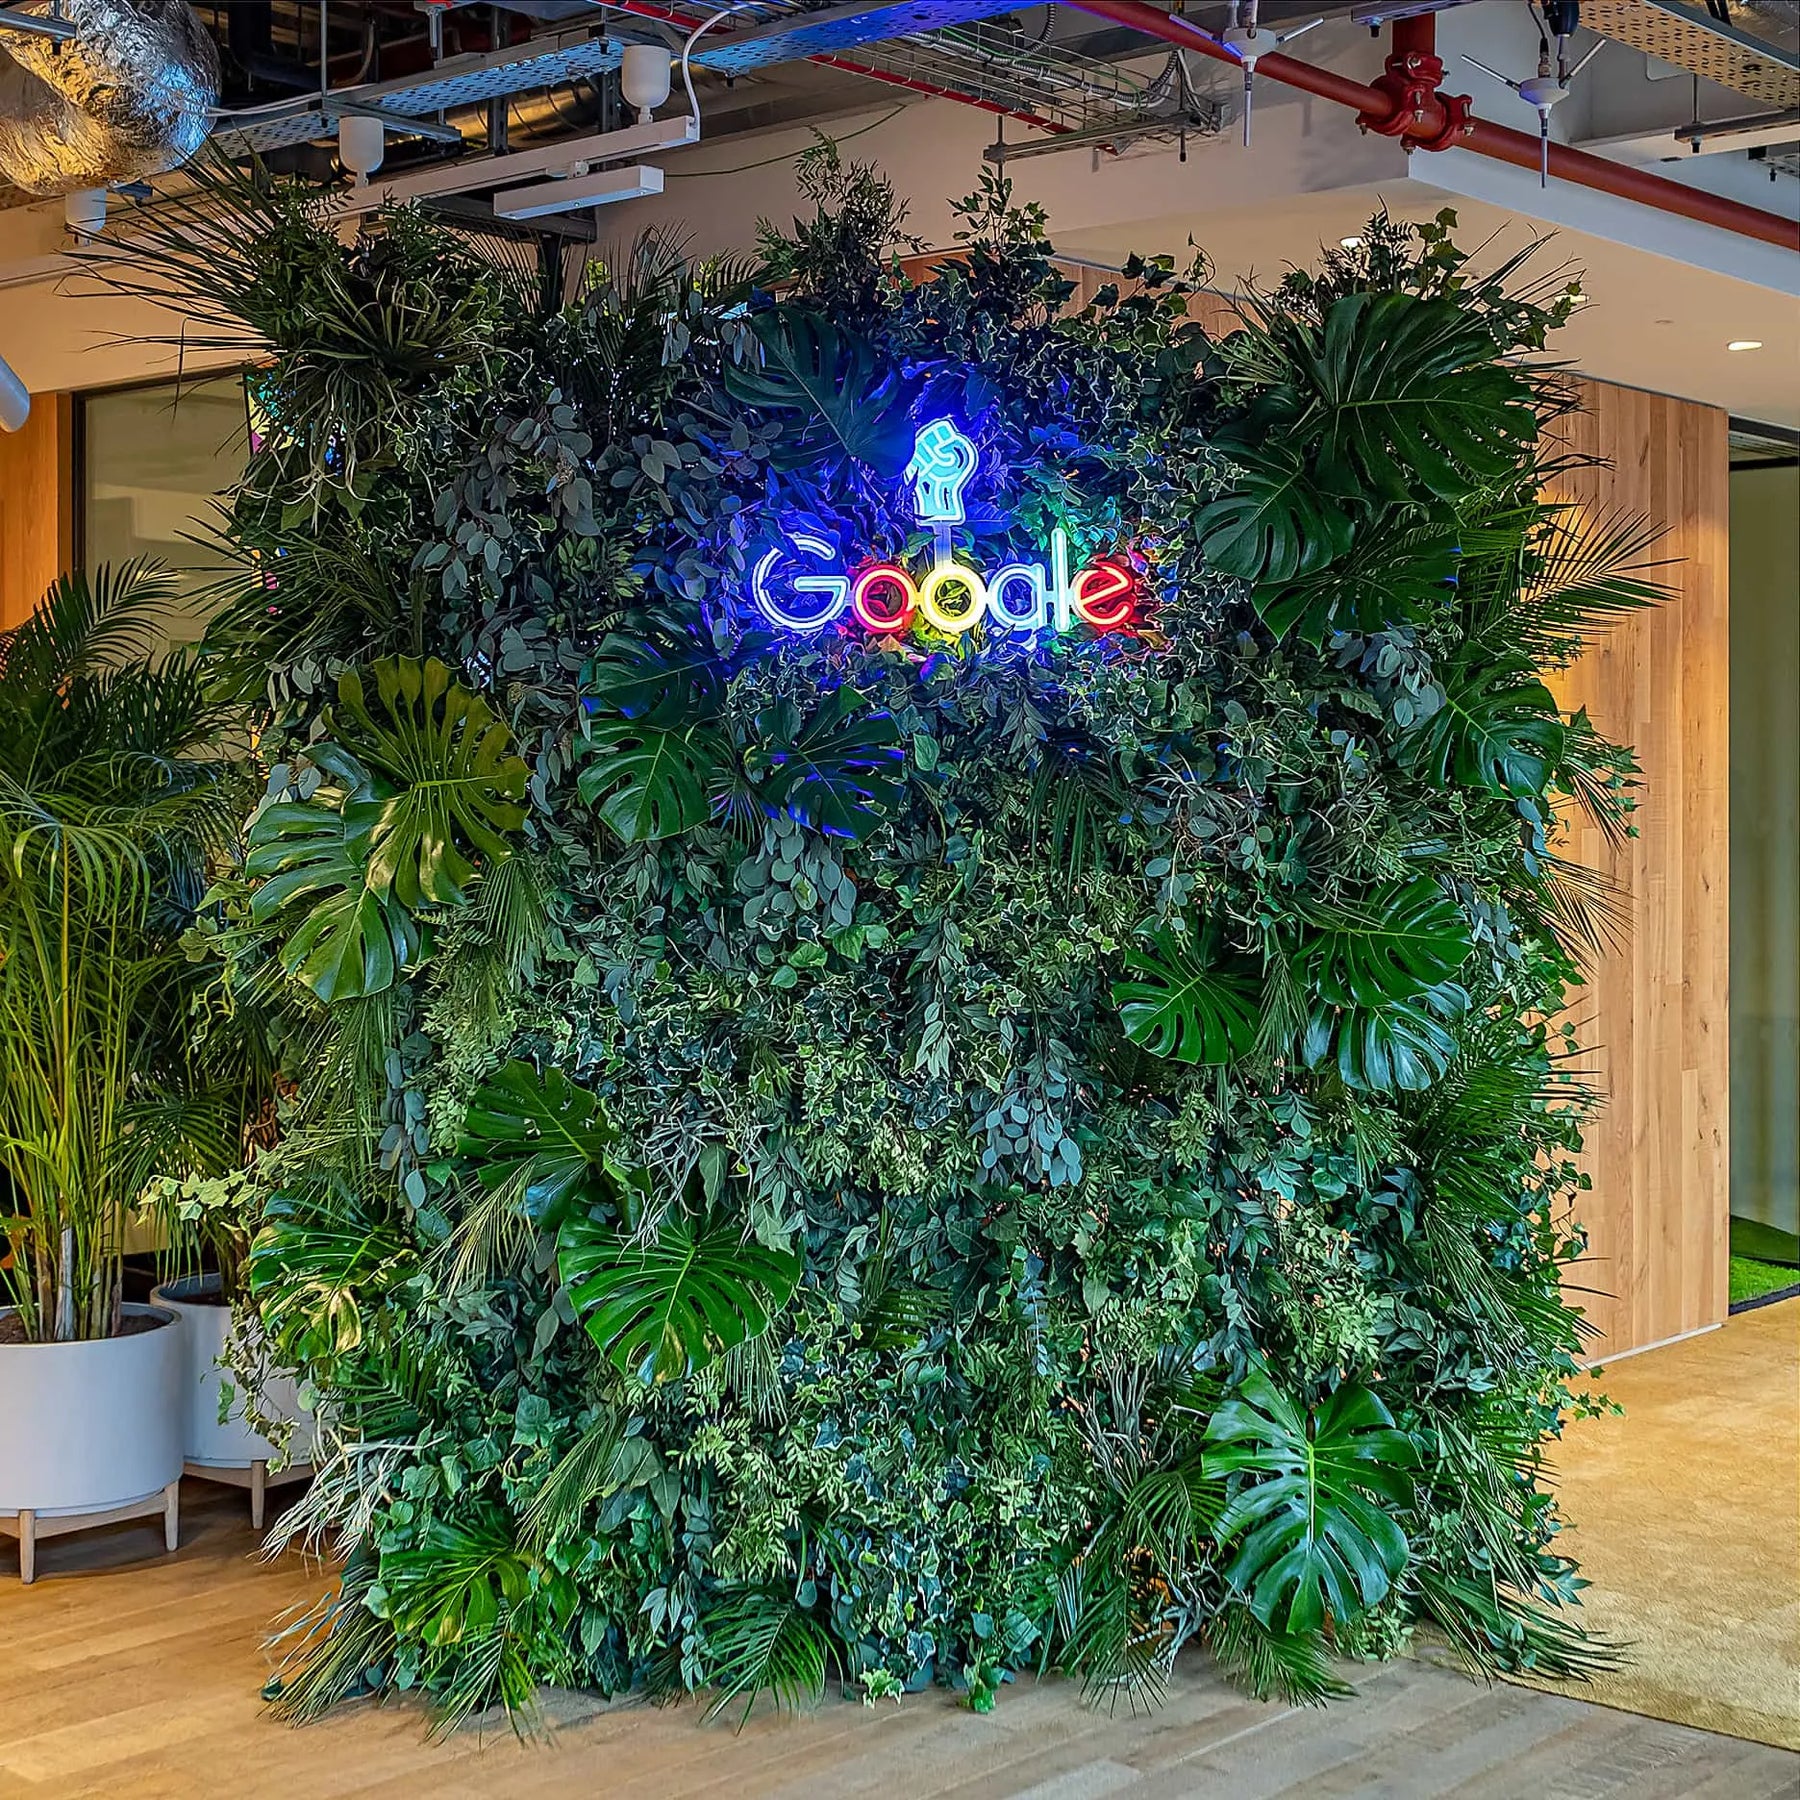 Lush green flower wall installation by Amaranté London for Google's Black History Month celebration, featuring dense foliage and a neon Google logo, blending nature with technology in a dynamic corporate environment.